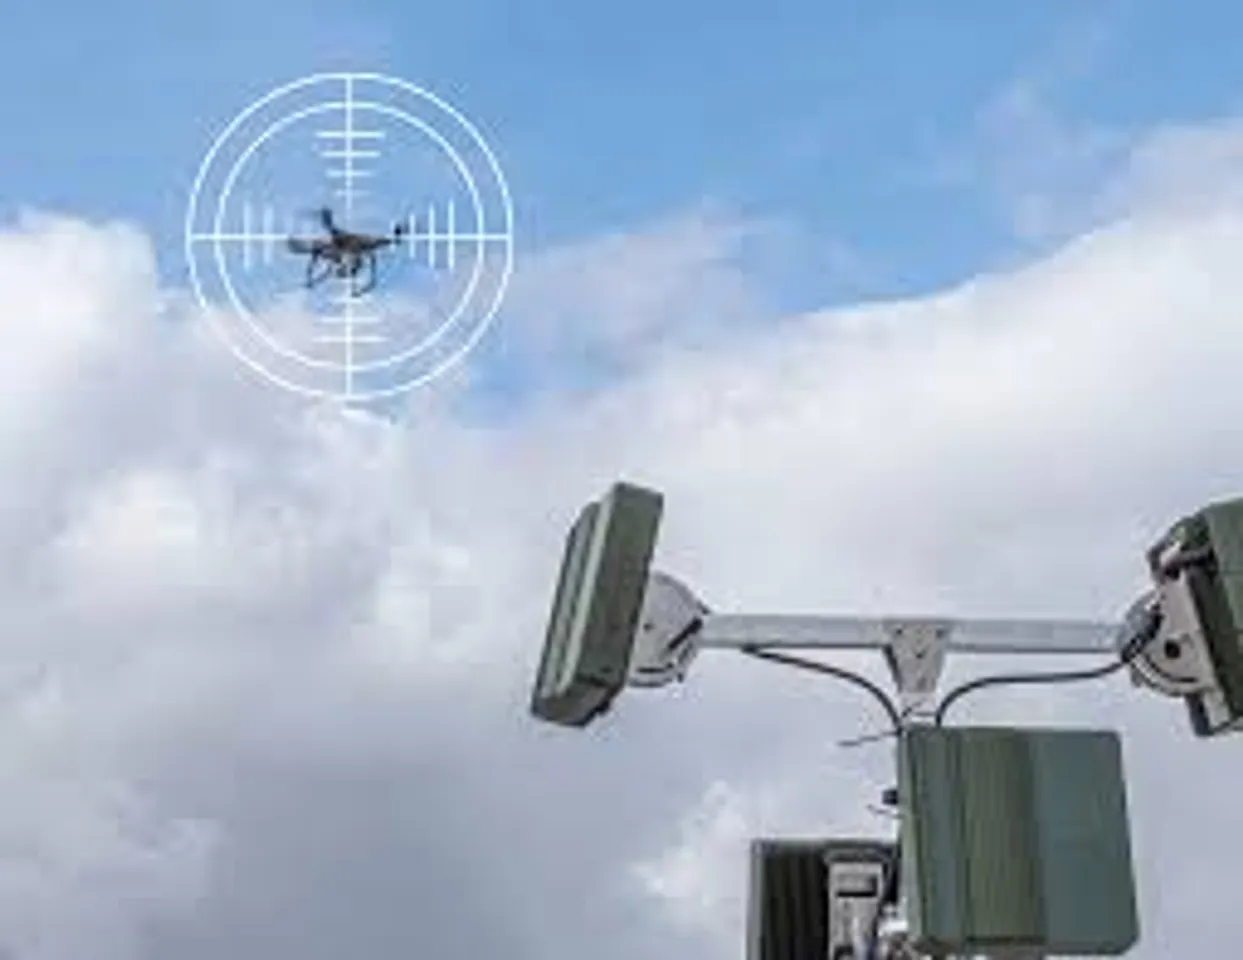 counter-drone technology